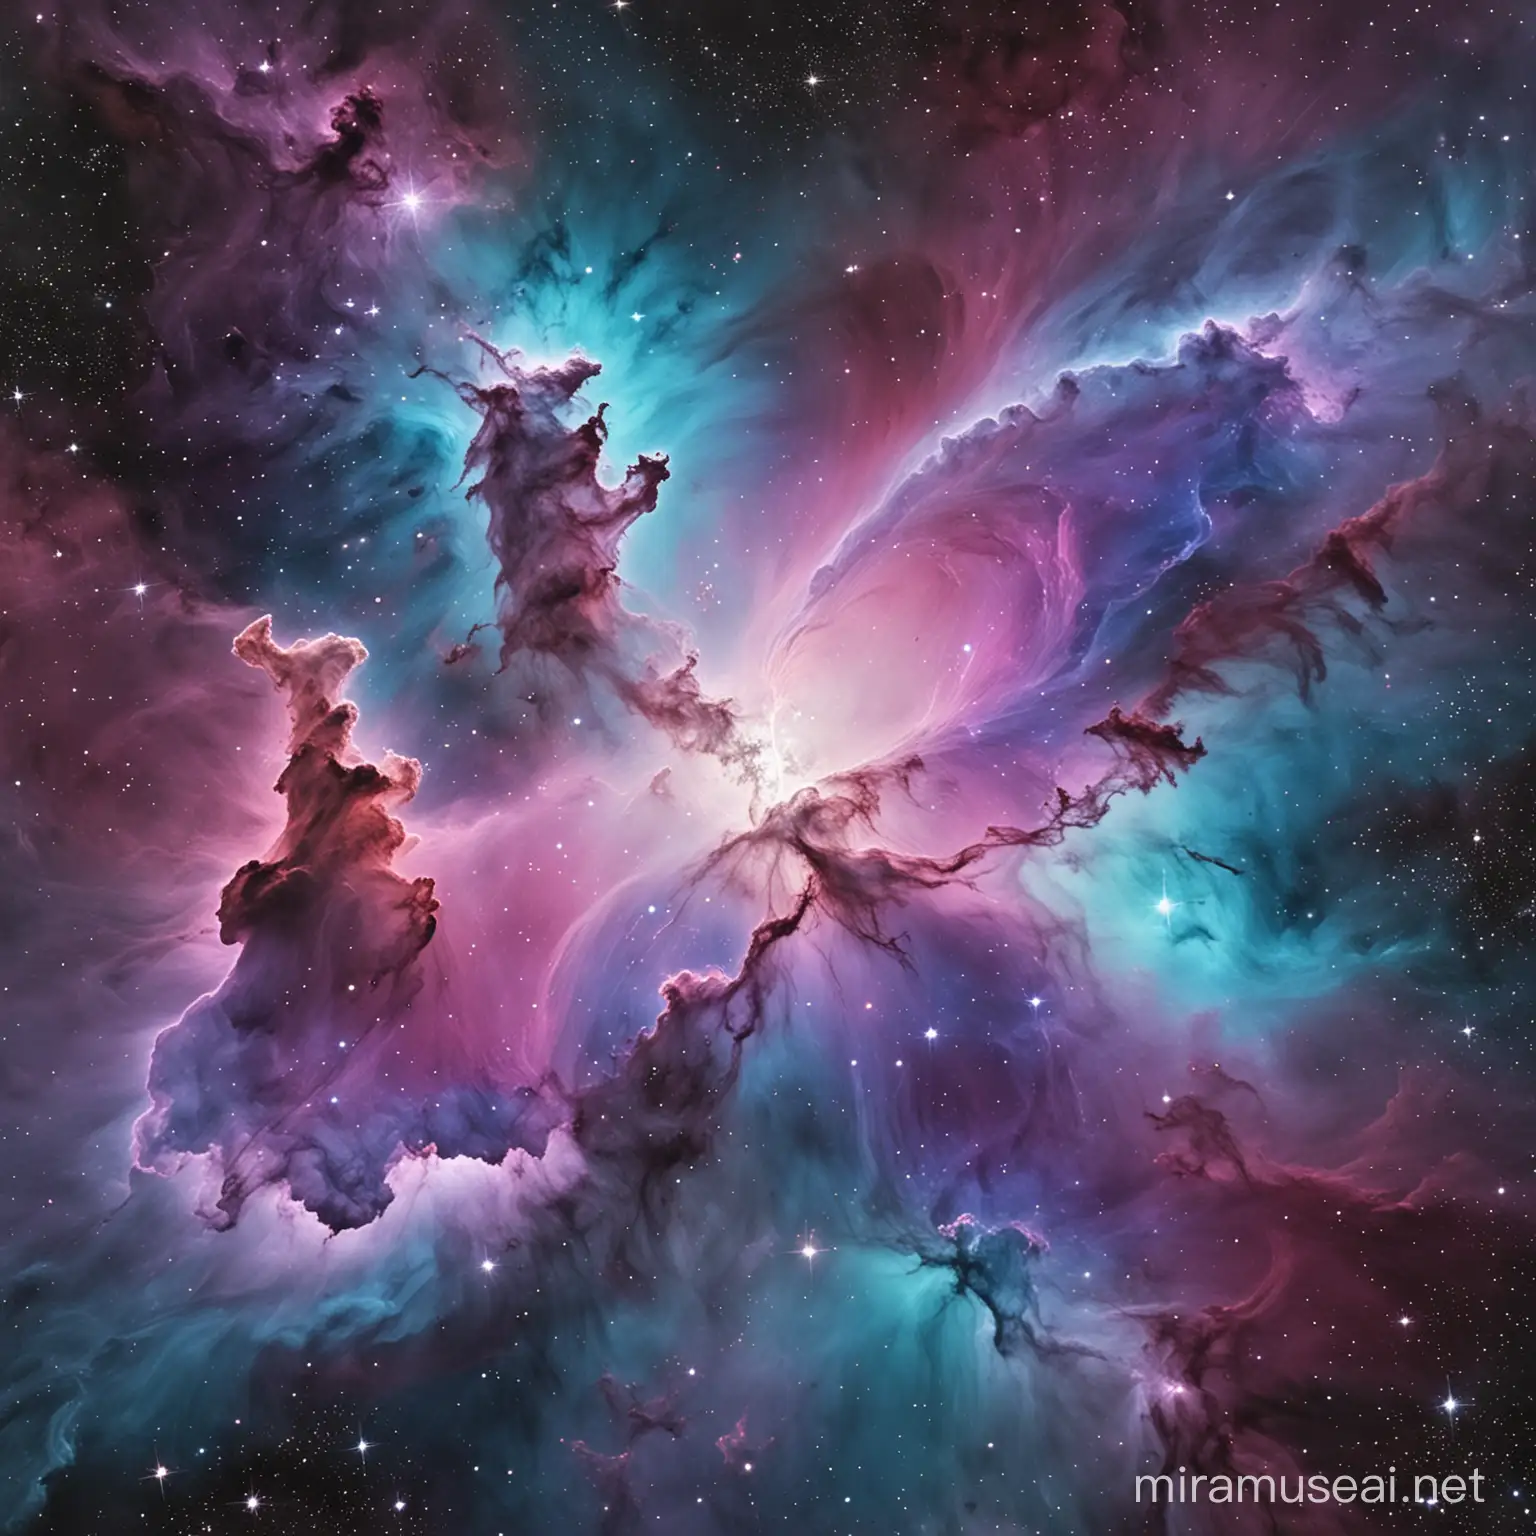 Vibrant Purple and Teal Nebula with Hints of White and Pink